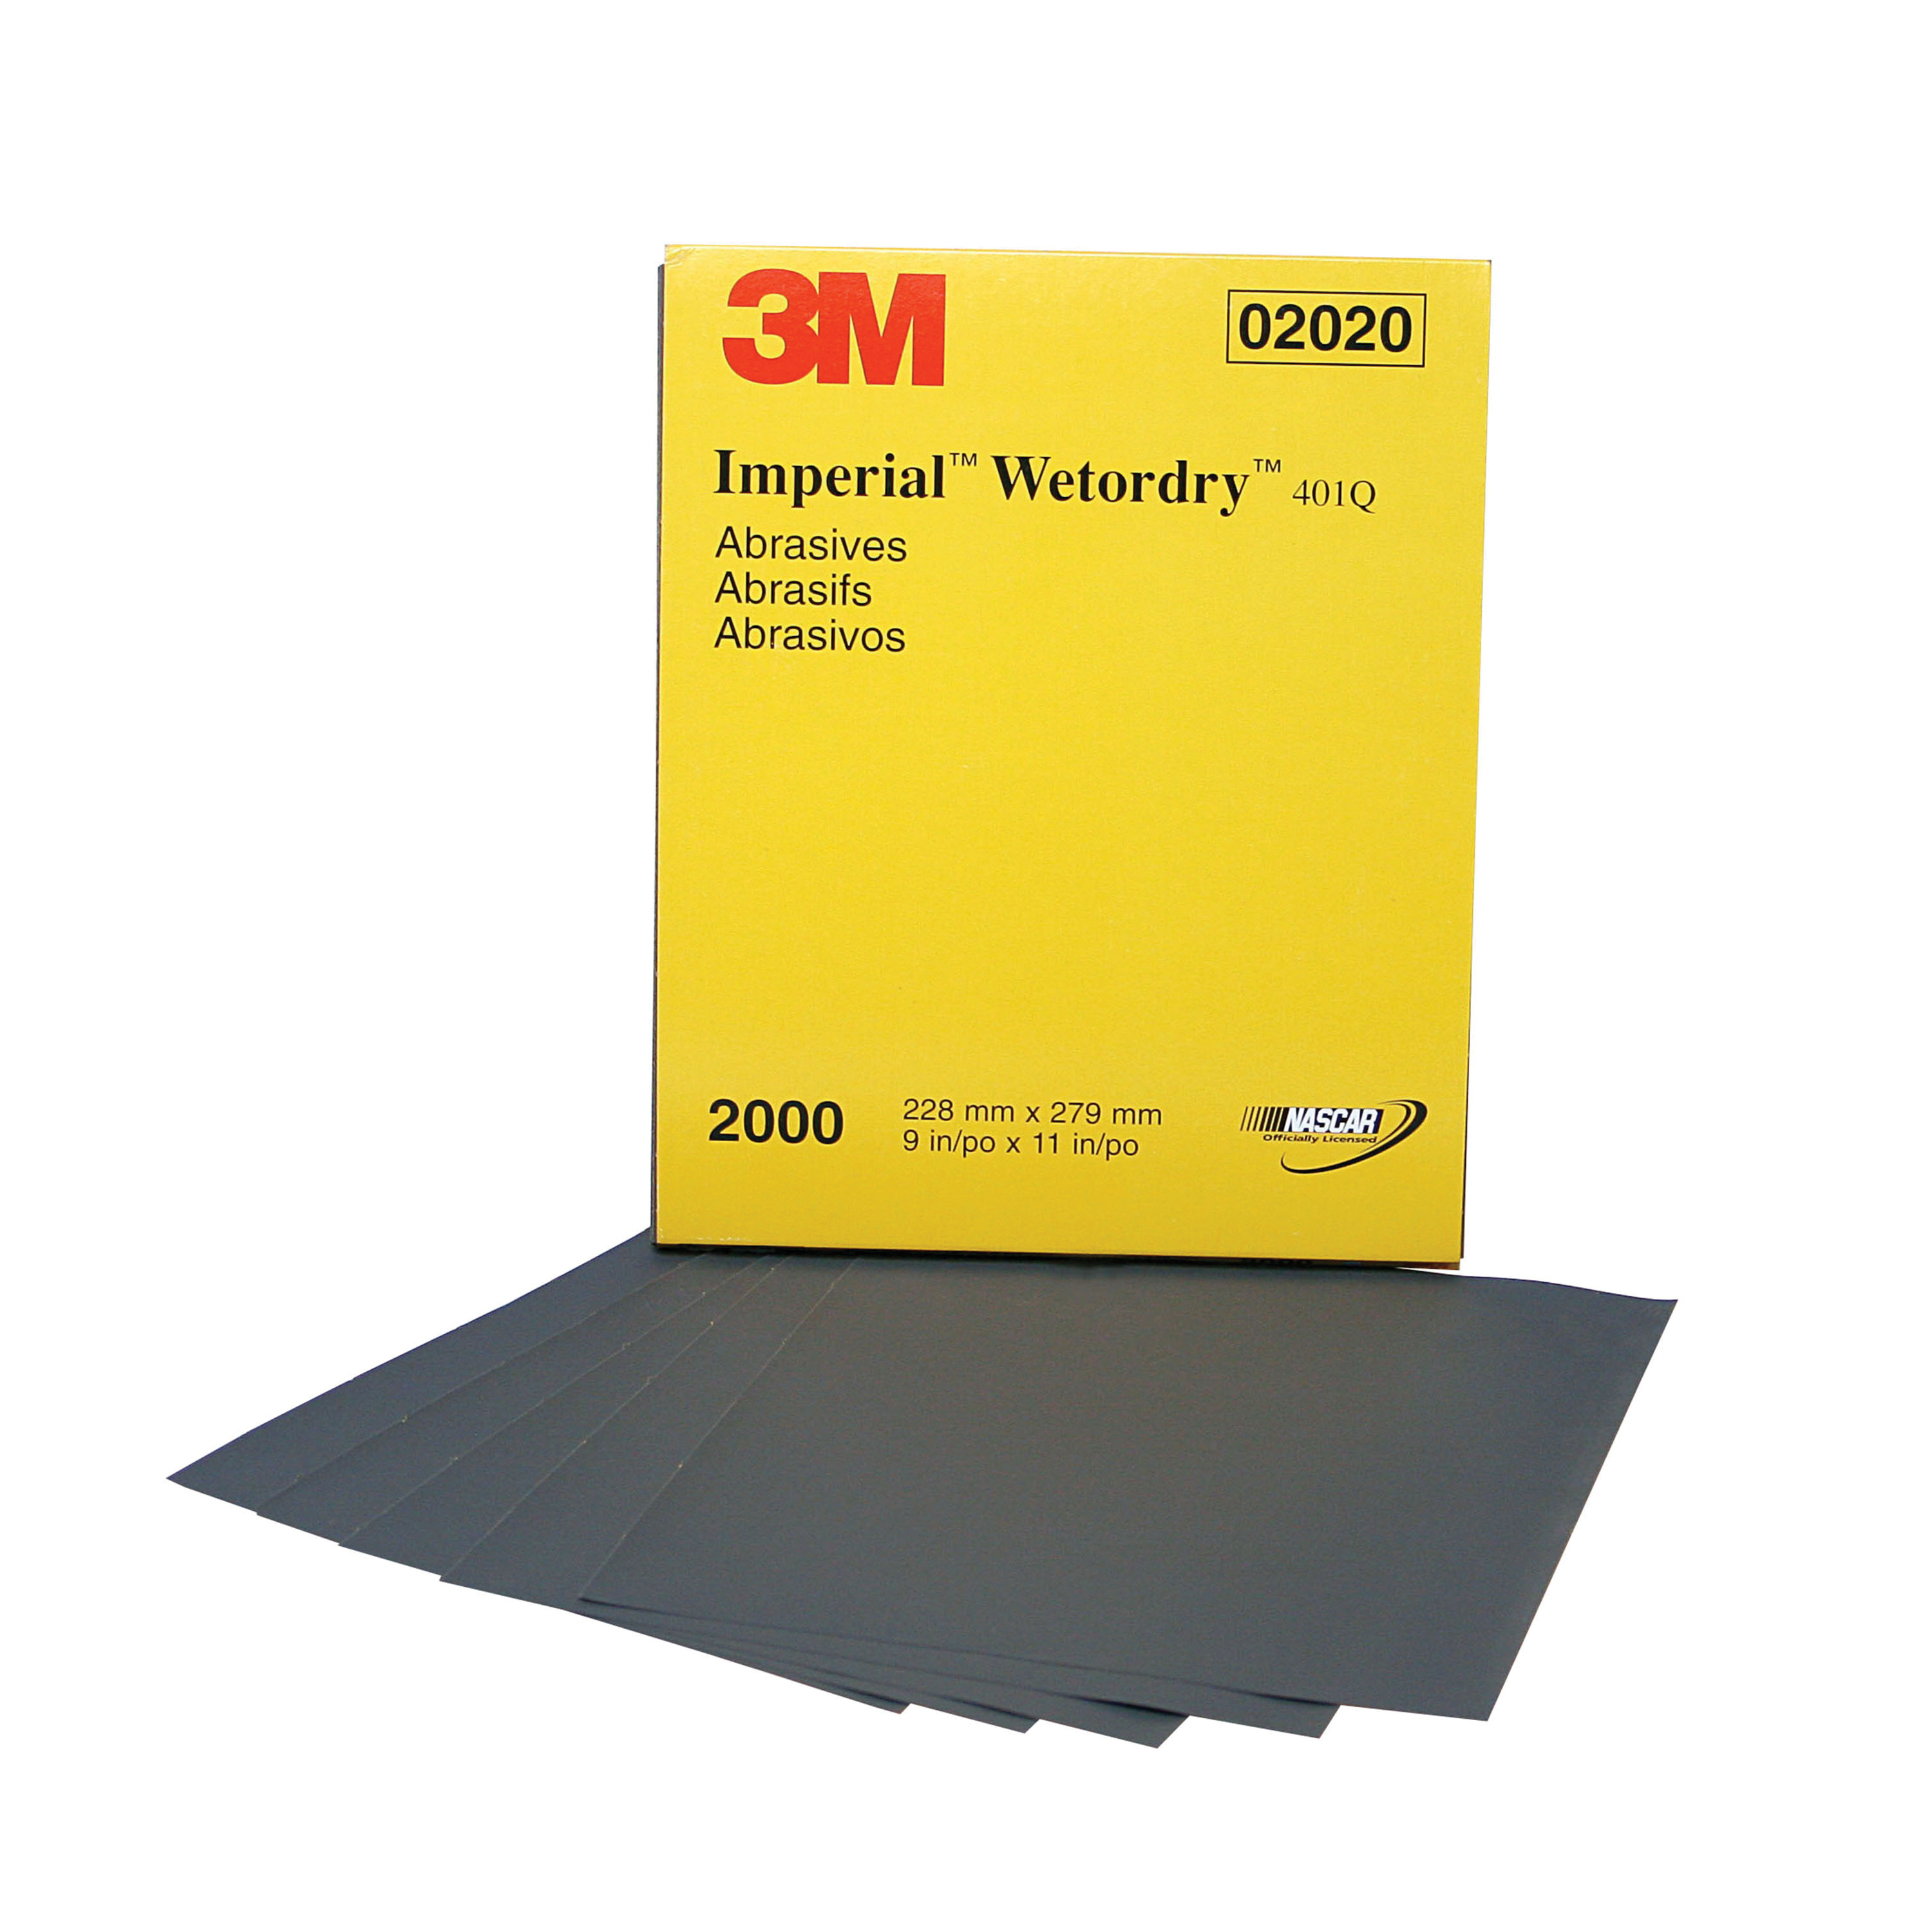 Wetordry™ Imperial™ 051131-02019 Coated Sanding Sheet, 11 in L x 9 in W, P2500 Grit, Fine Grade, Silicon Carbide Abrasive, Paper Backing